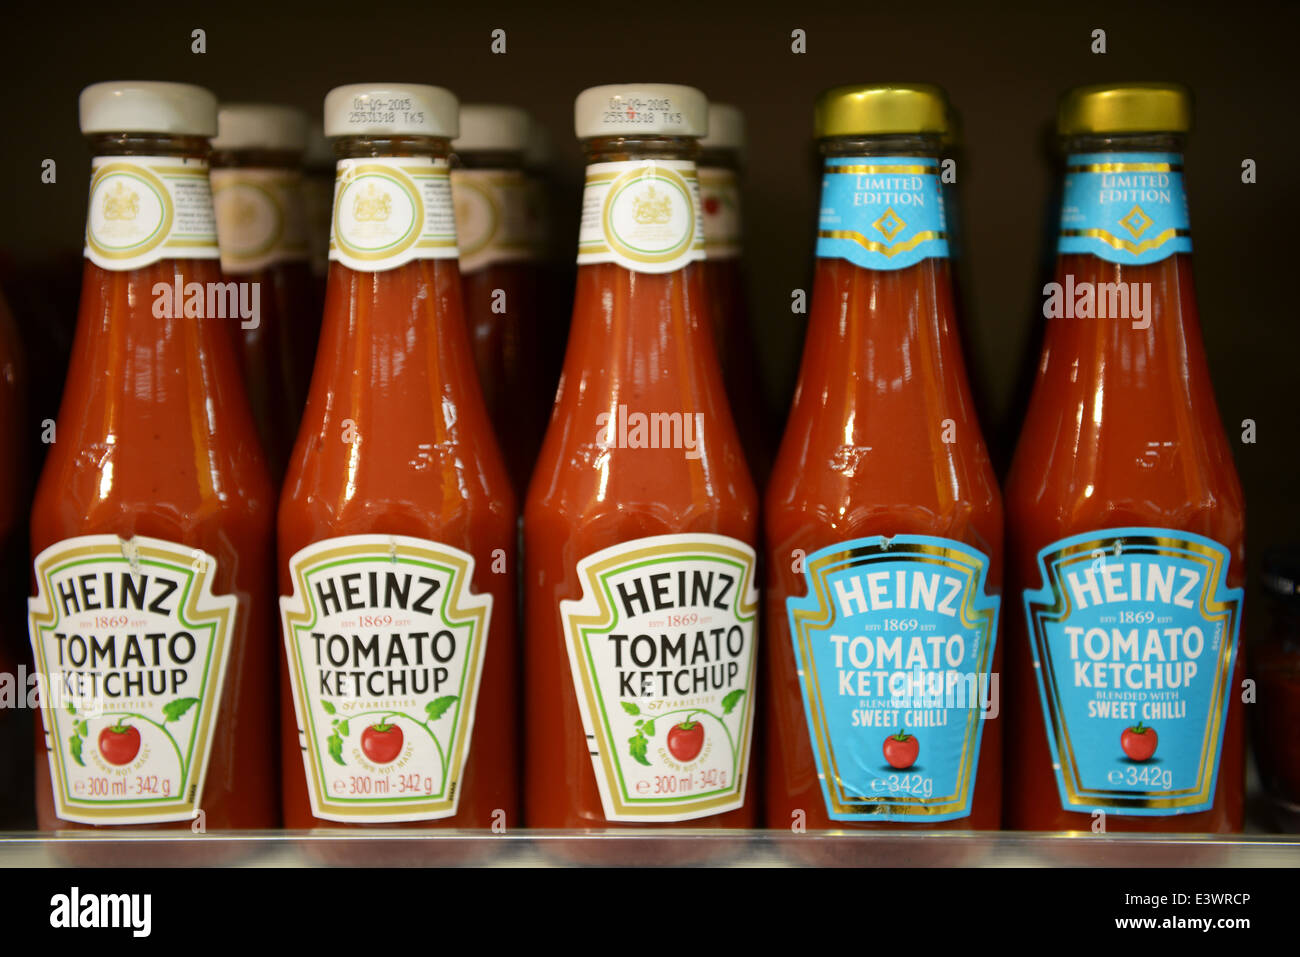 Heinz Tomato Ketchup and limited edition Sweet Chilli Stock Photo